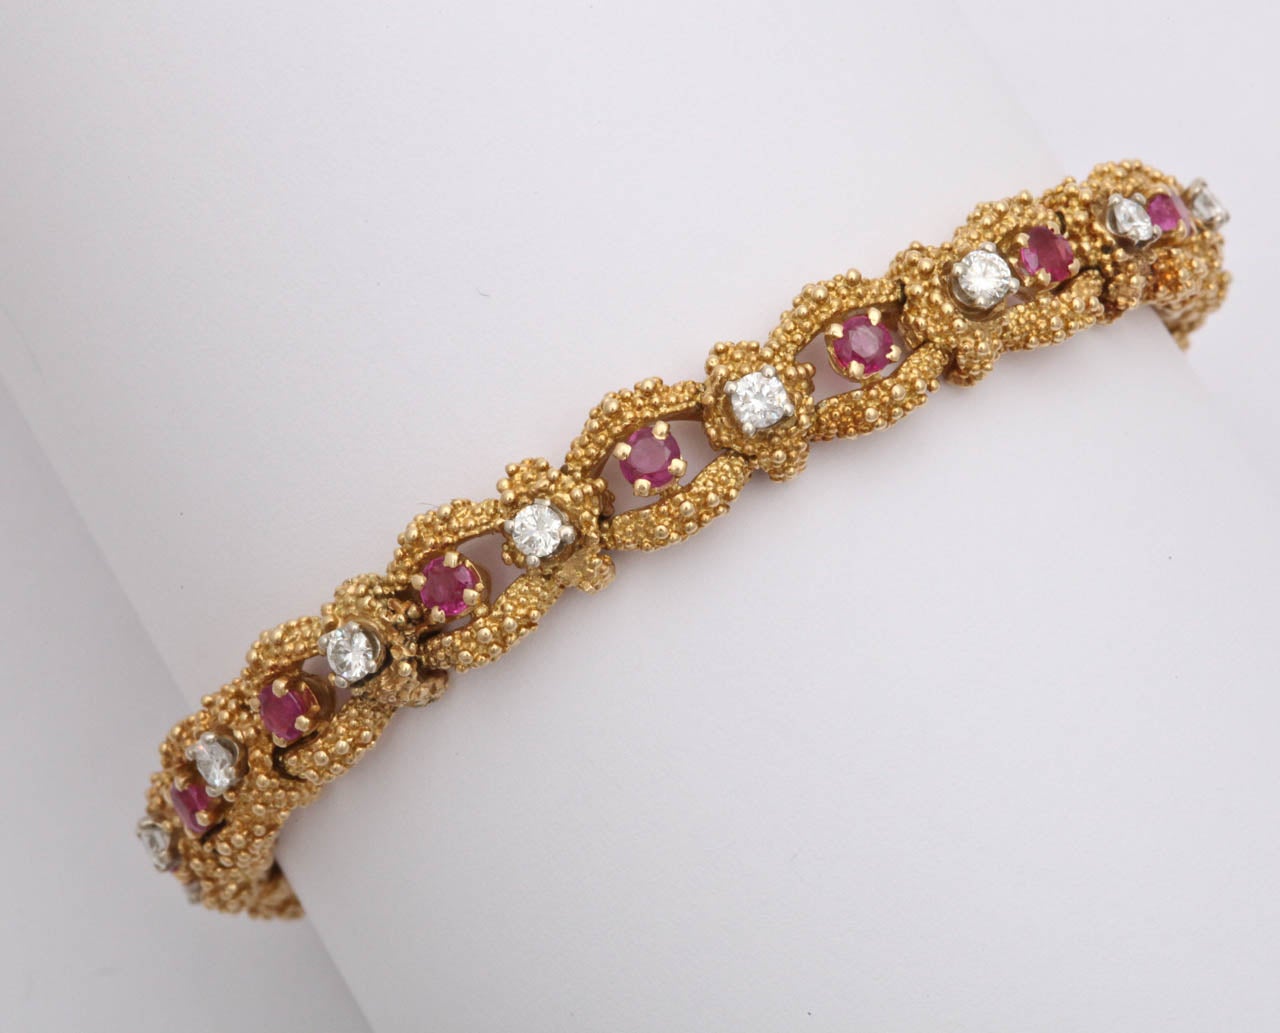 18kt Yellow Gold open link flexible Burmese ruby and high quality bracelet. Signed Tiffany & Co. With very high quality full cut diamonds. Circa 1950s.